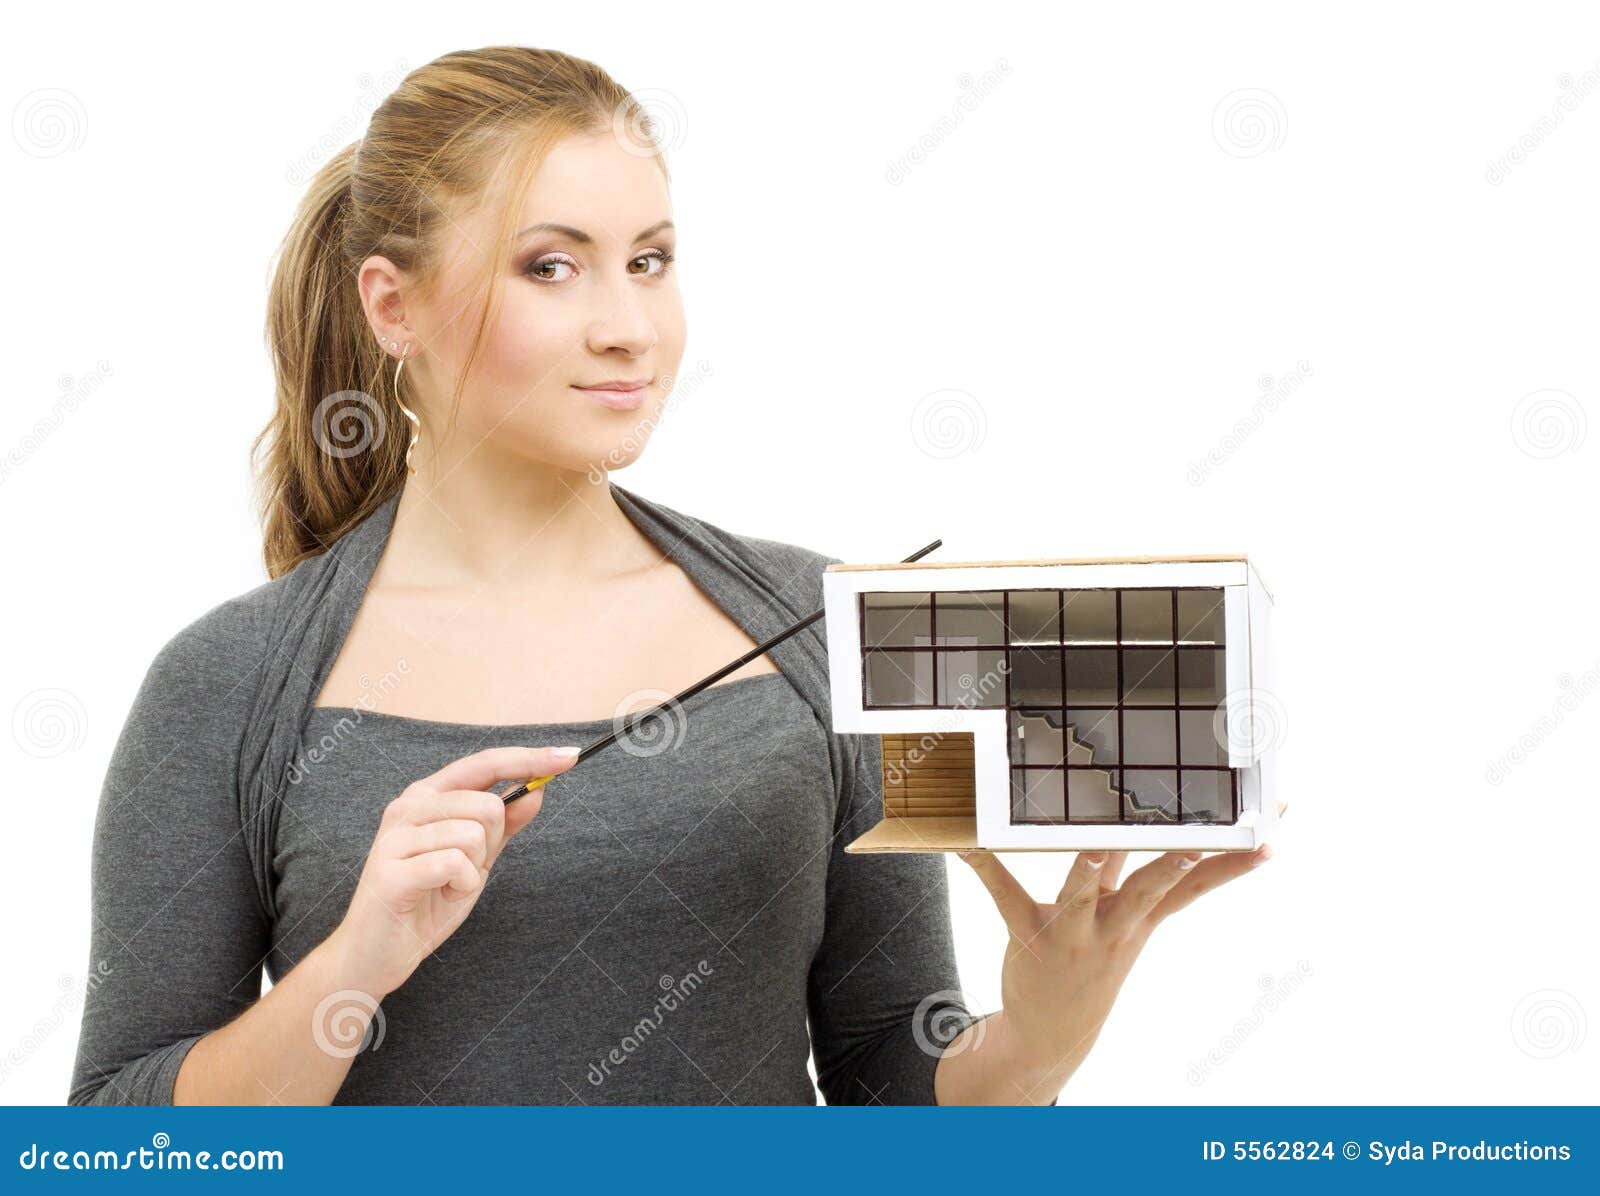 Real estate agent stock photo. Image of confident, female - 5562824